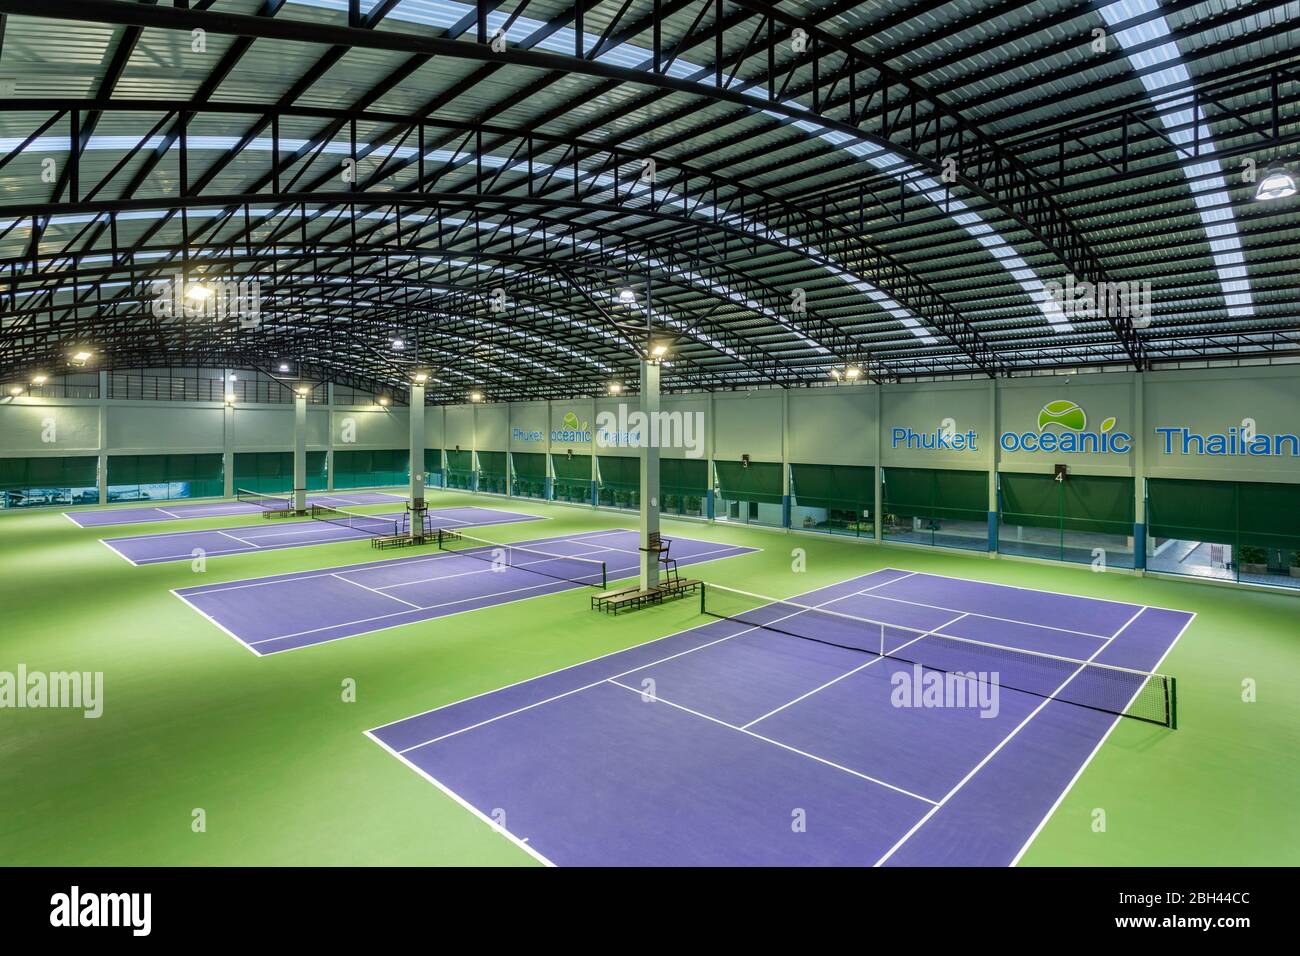 Indoor tennis court at the Oceanic Tennis and Fitness Club in Phuket,  Thailand Stock Photo - Alamy